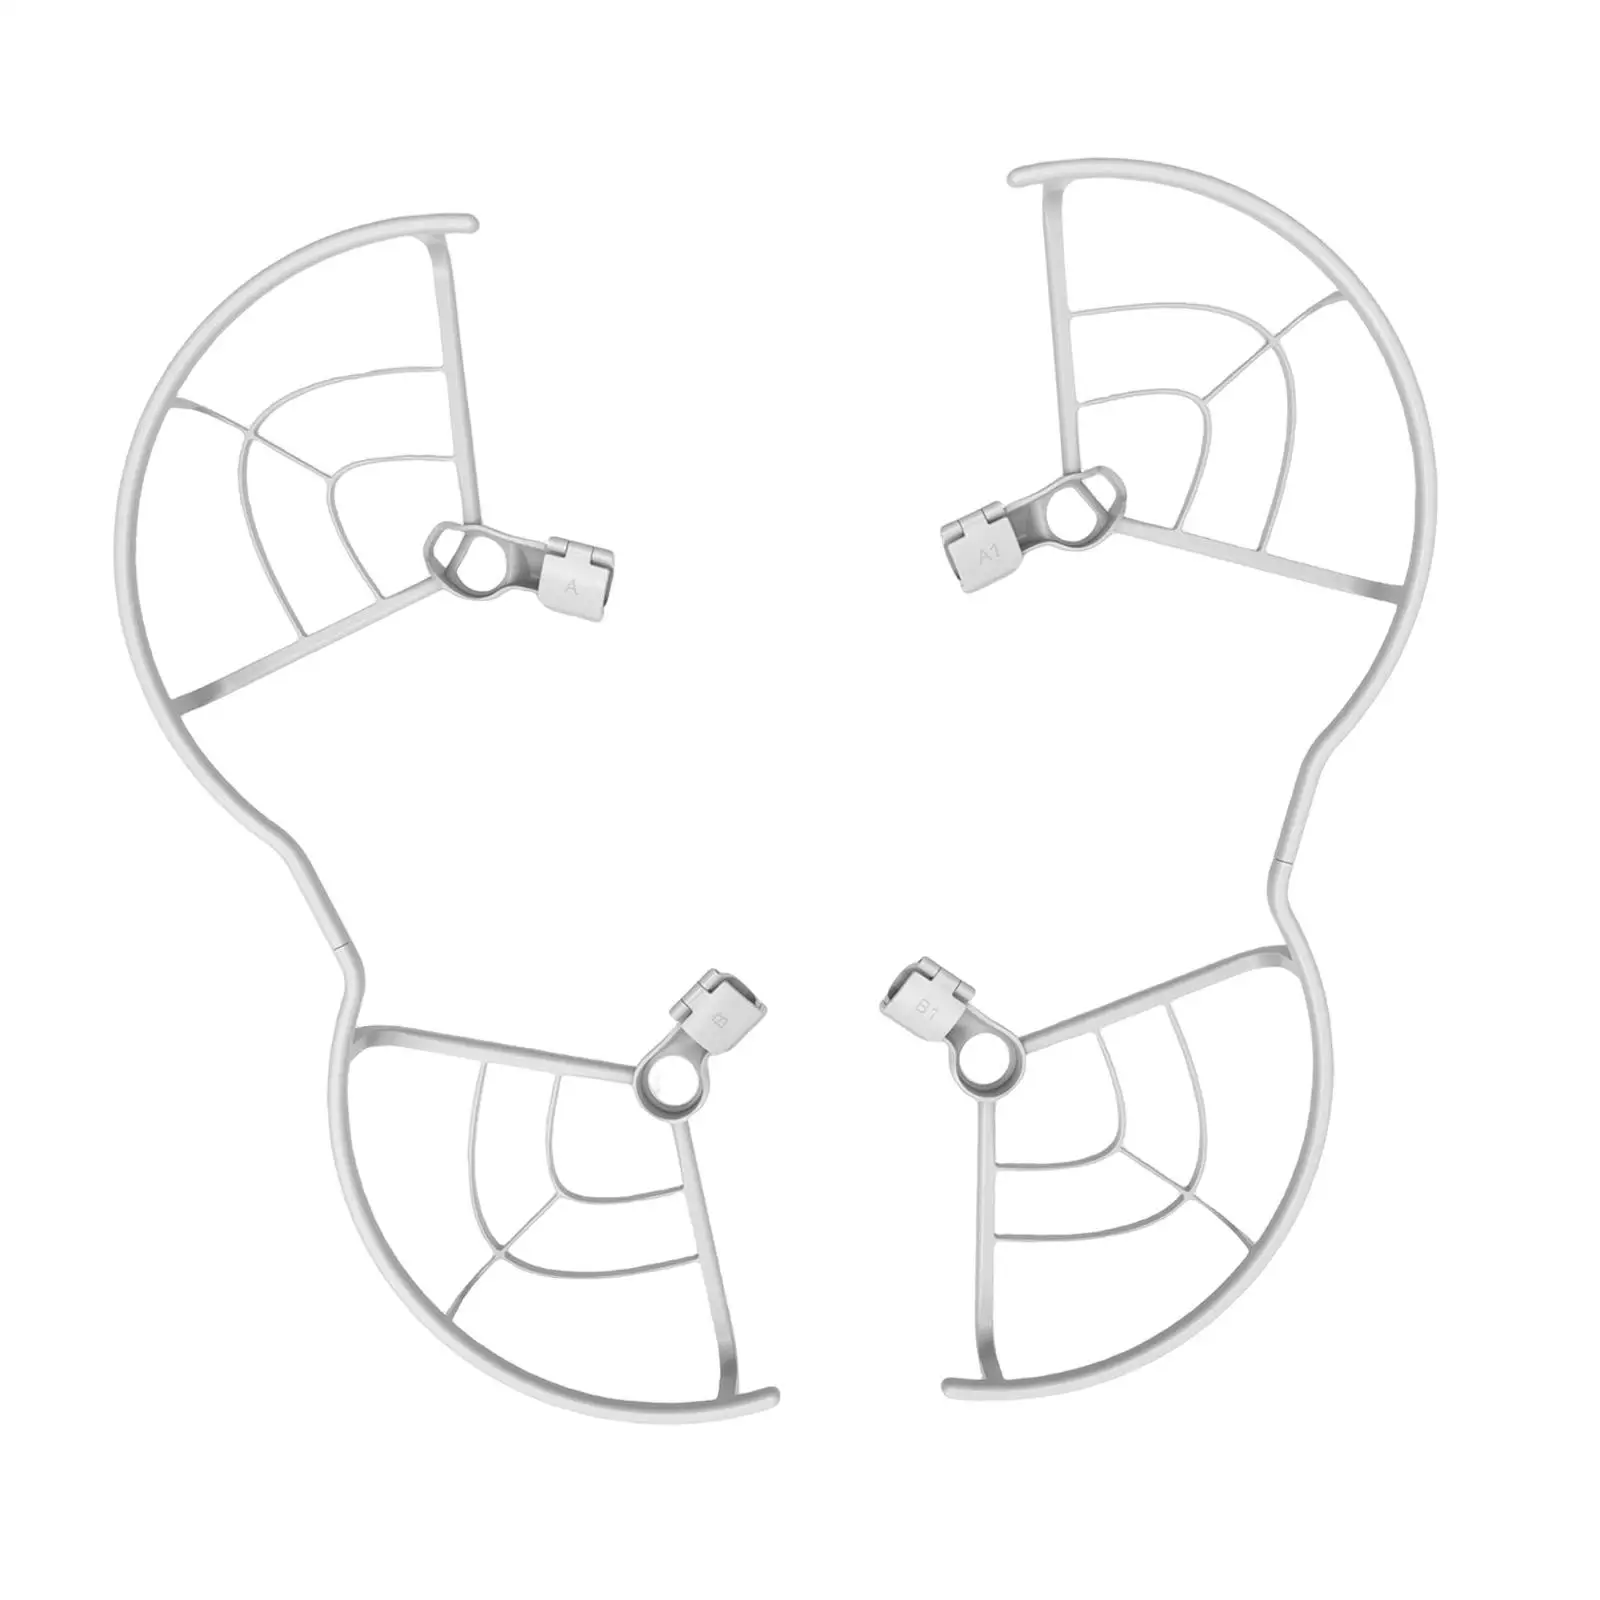 2 Pieces Propeller Protector fortress Crash Guard Drone Propeller Guards Quick Release Removable for Mini 3 Accs